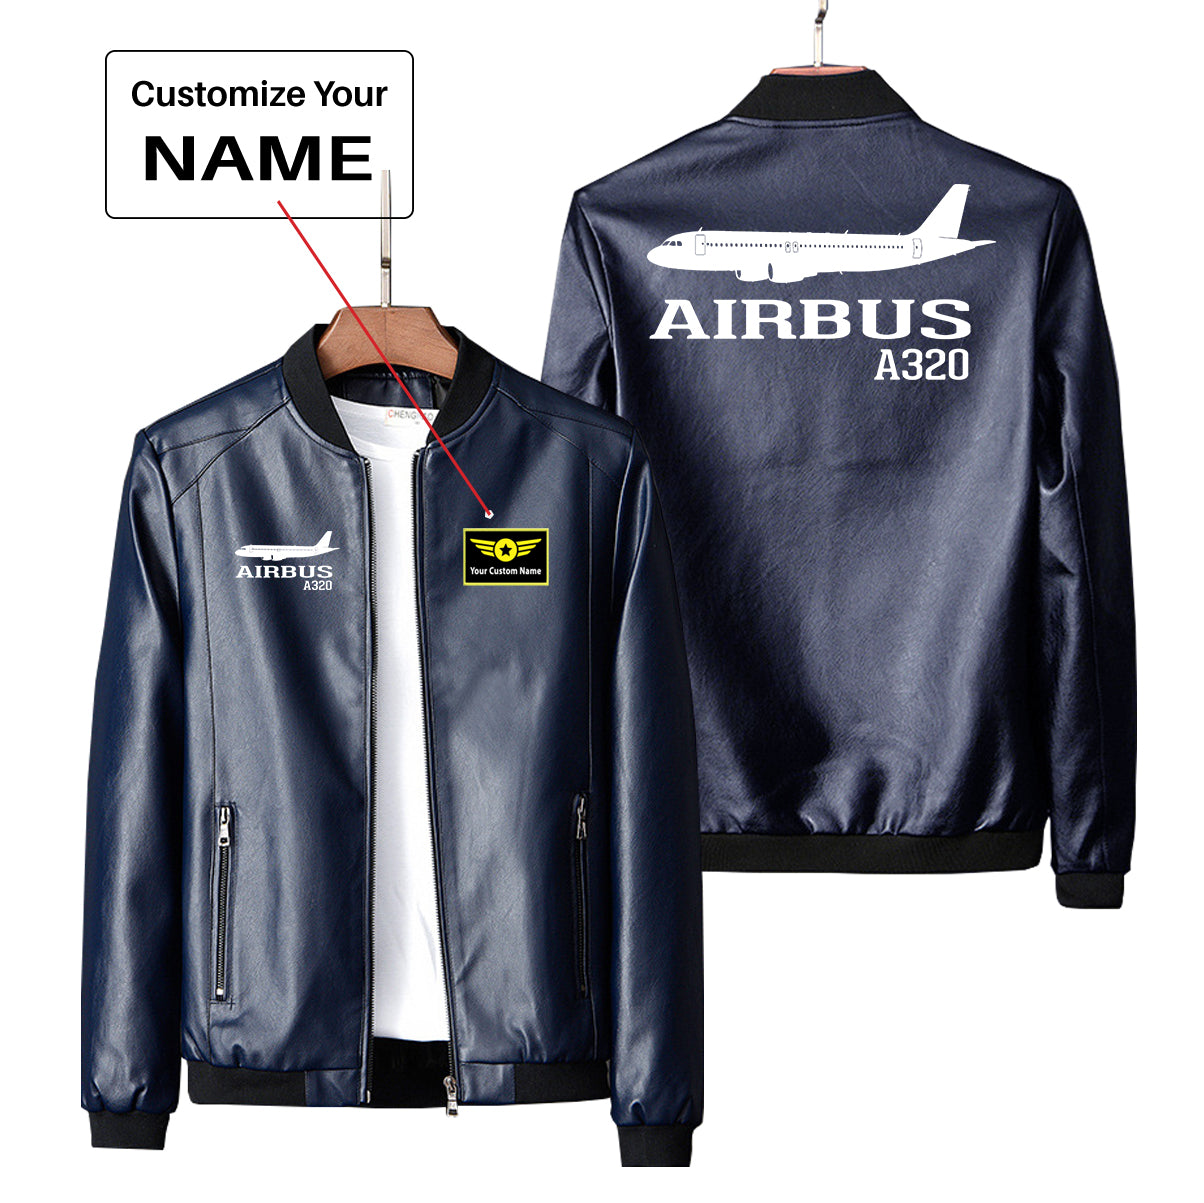 Airbus A320 Printed Designed PU Leather Jackets